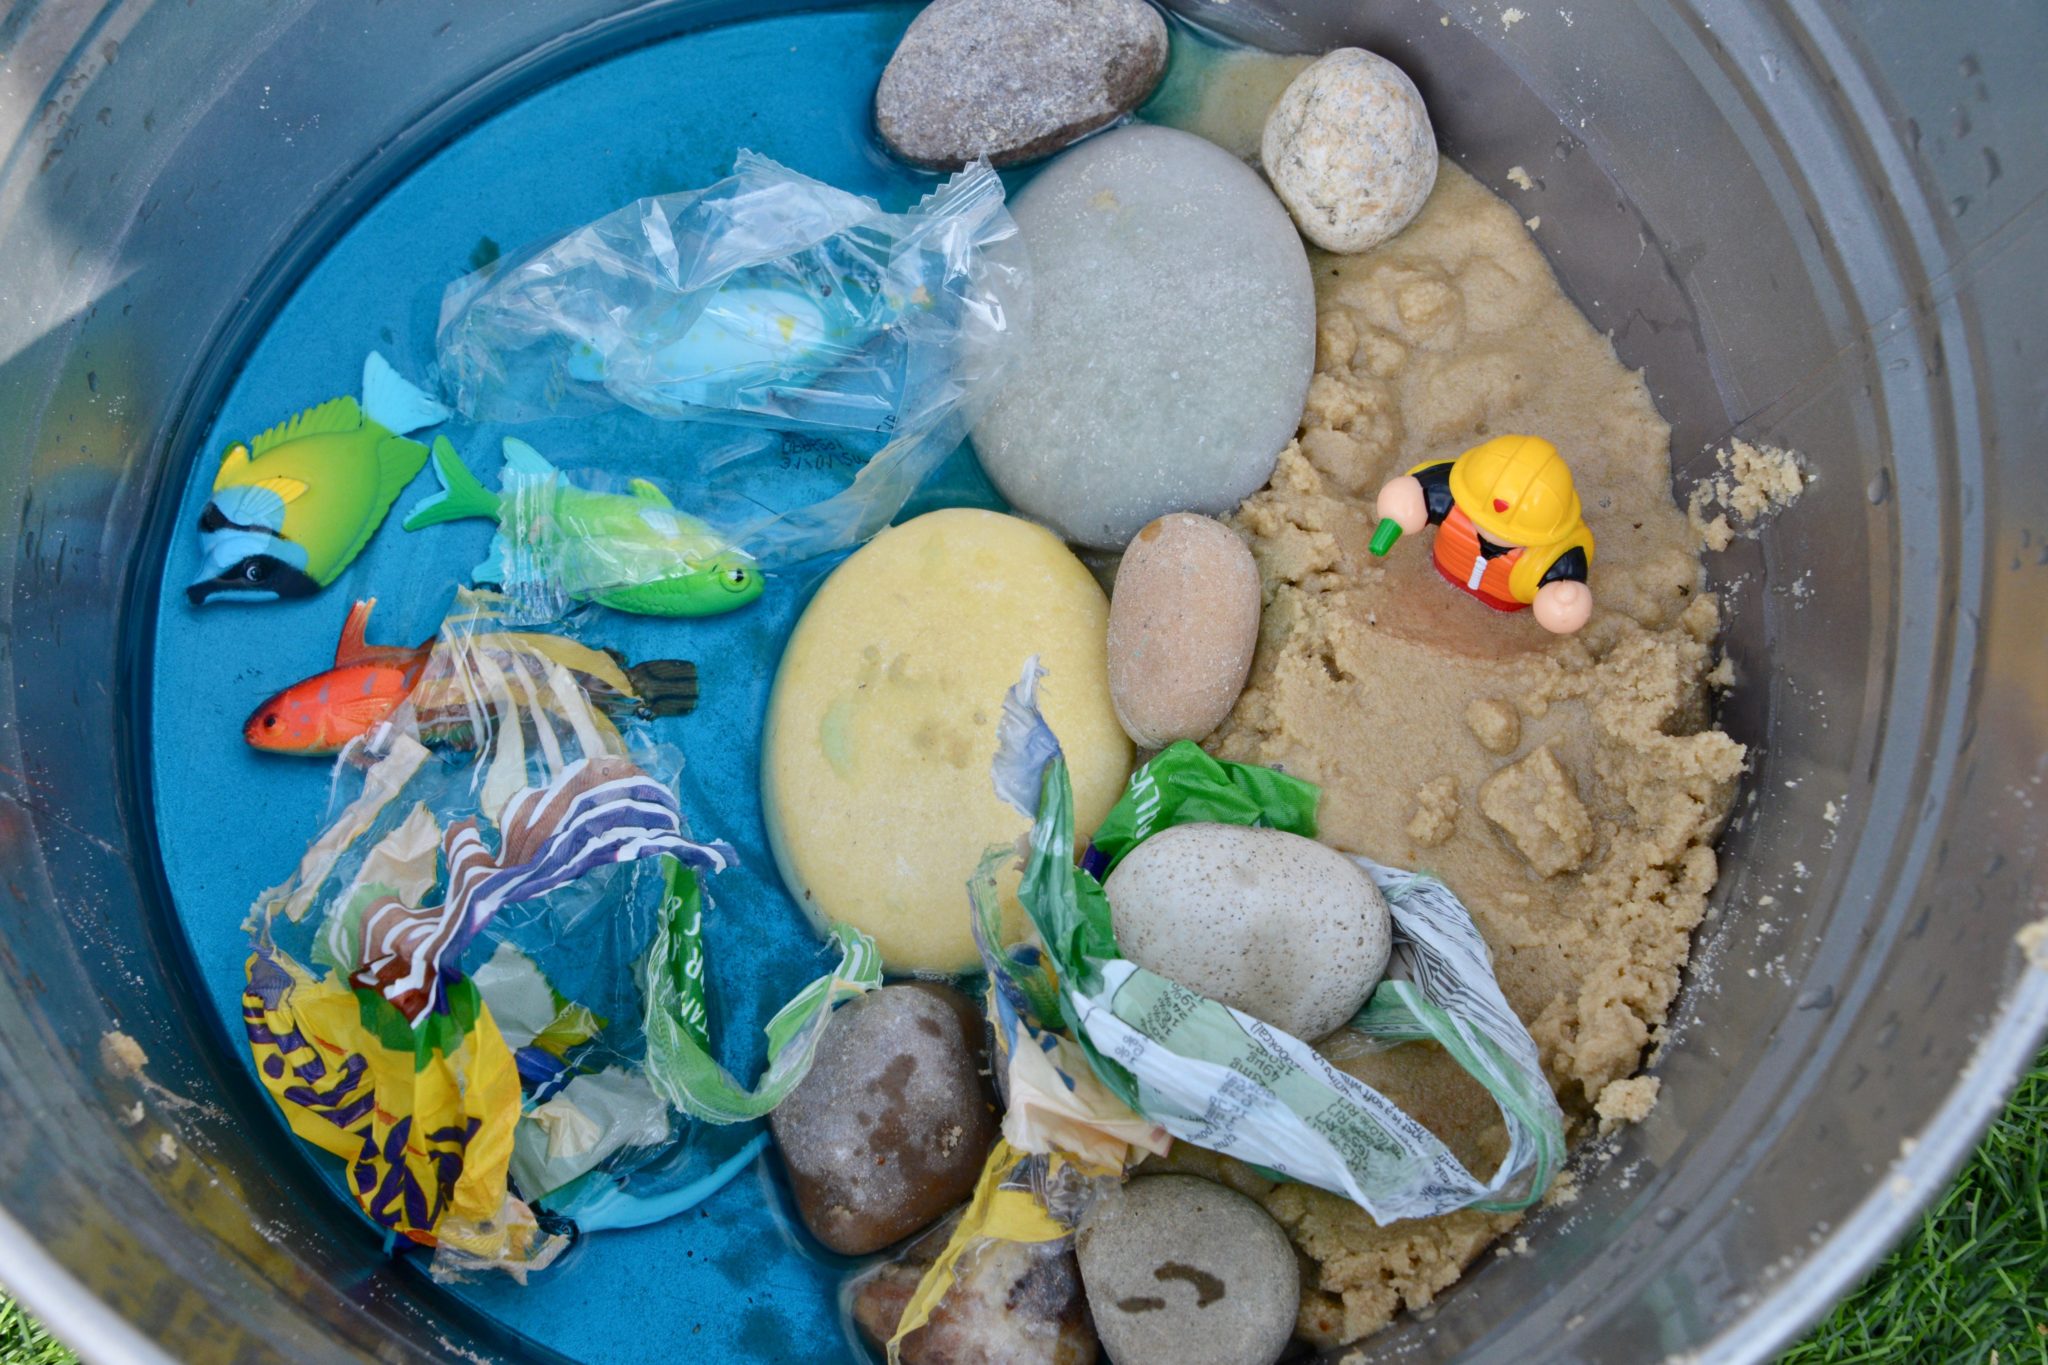 Sea Pollution Small Play set up